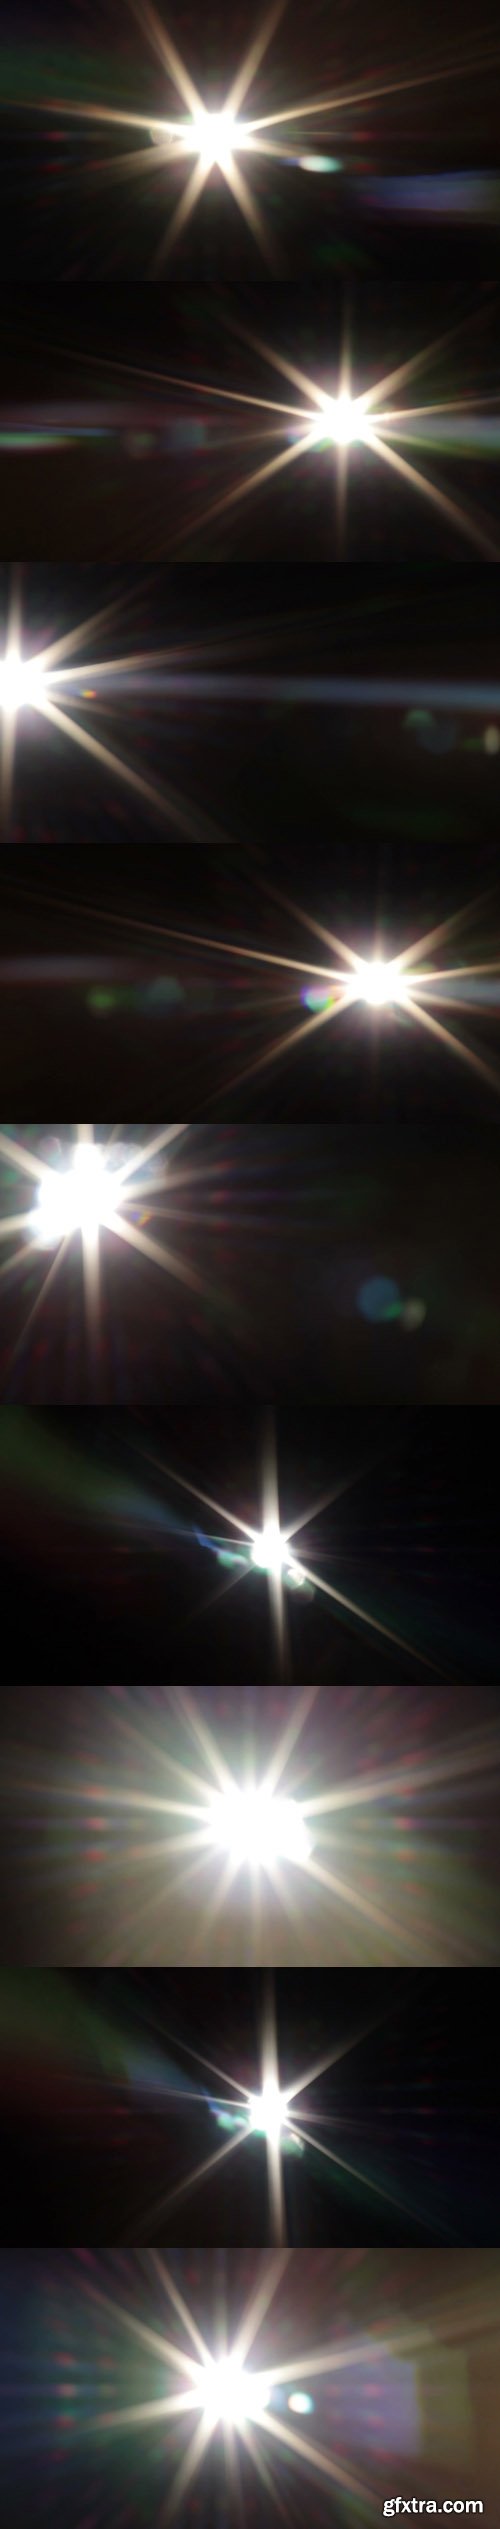 MA - Lens Flares And Lights